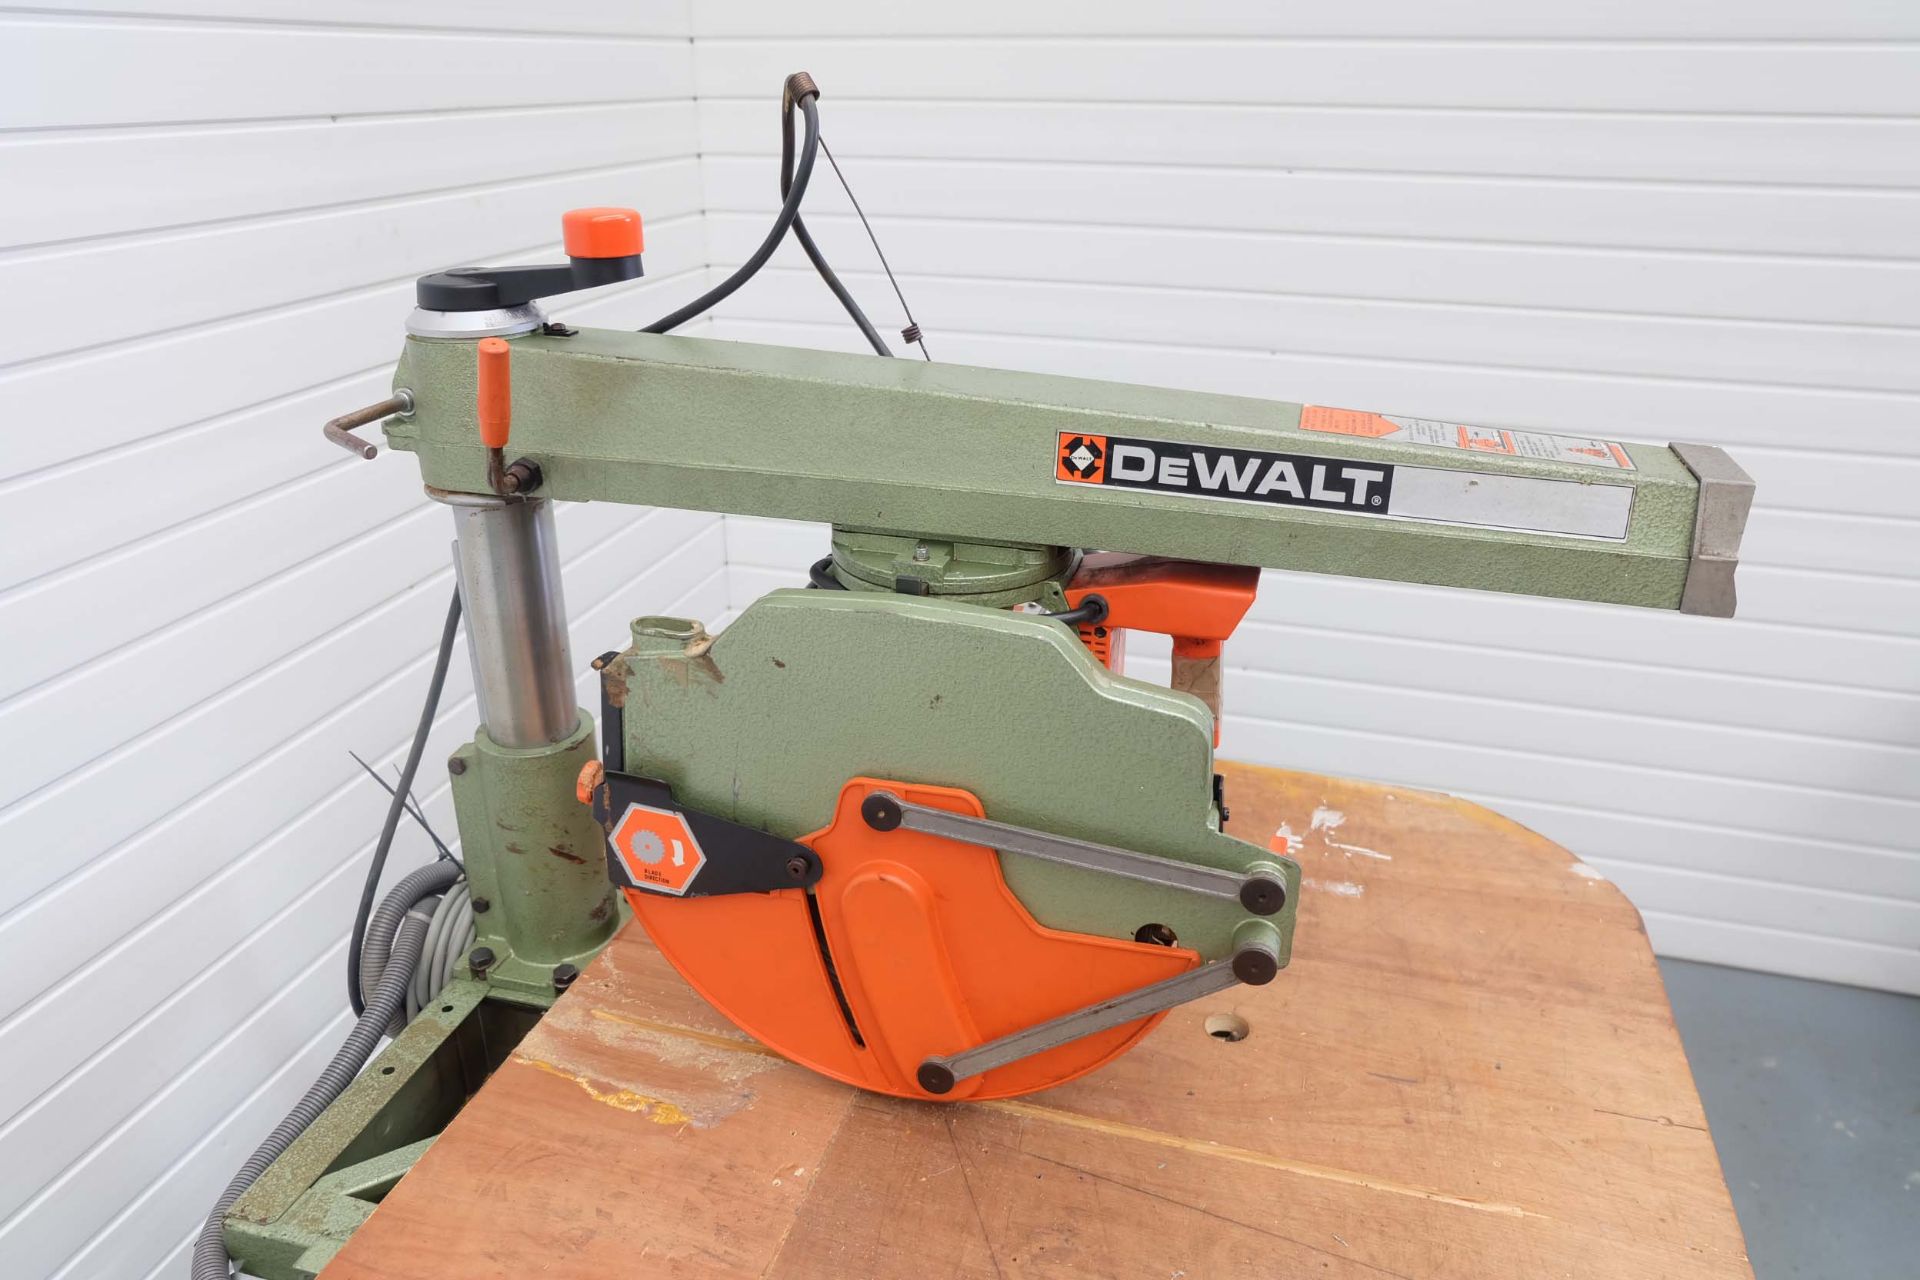 DeWalt Model DW8003 Radial Arm Saw. Motor 3 Phase, 2.2kW, 3Hp. Made in Italy - Image 2 of 8